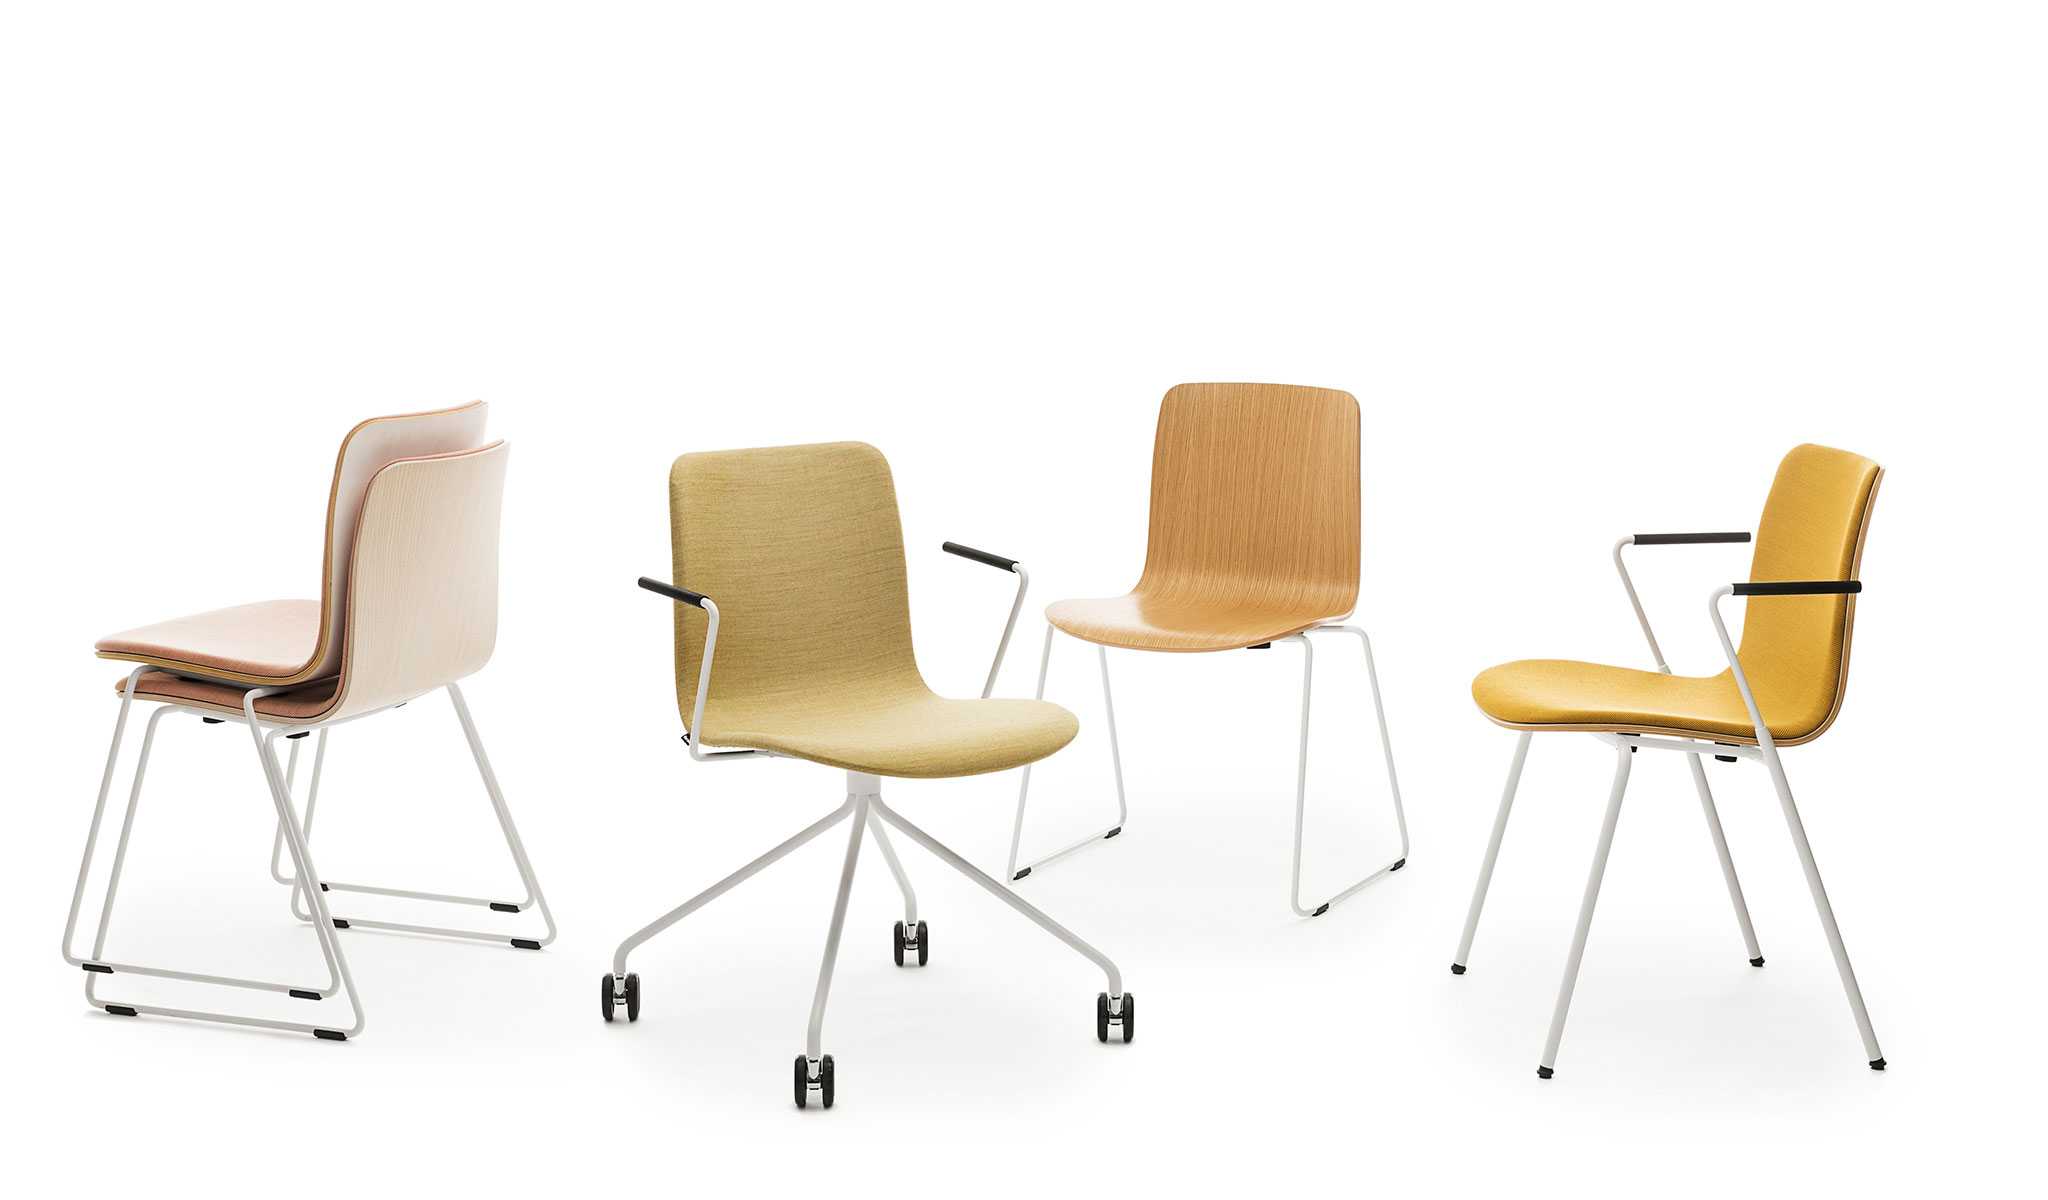 Sola family of chairs